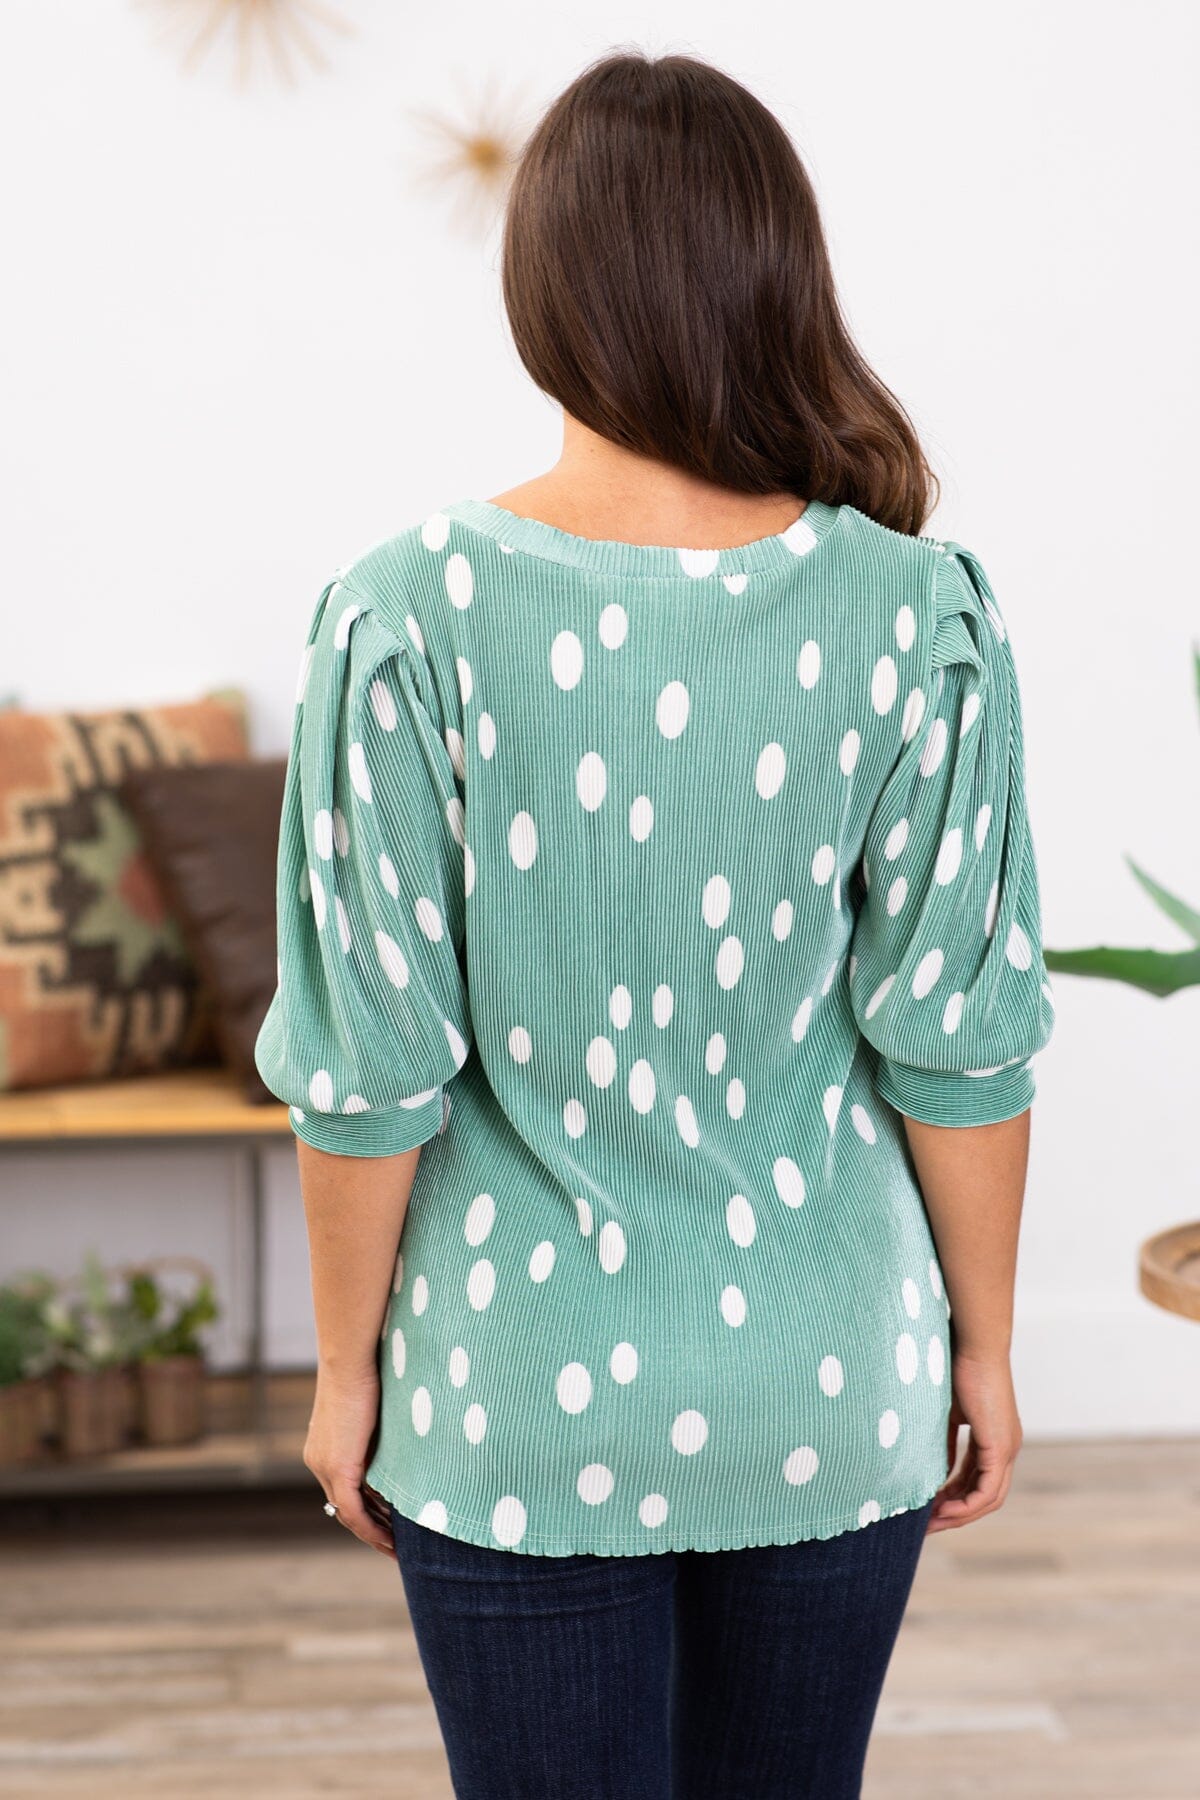 Mint and White Crystal Pleat Polka Dot Top - Filly Flair